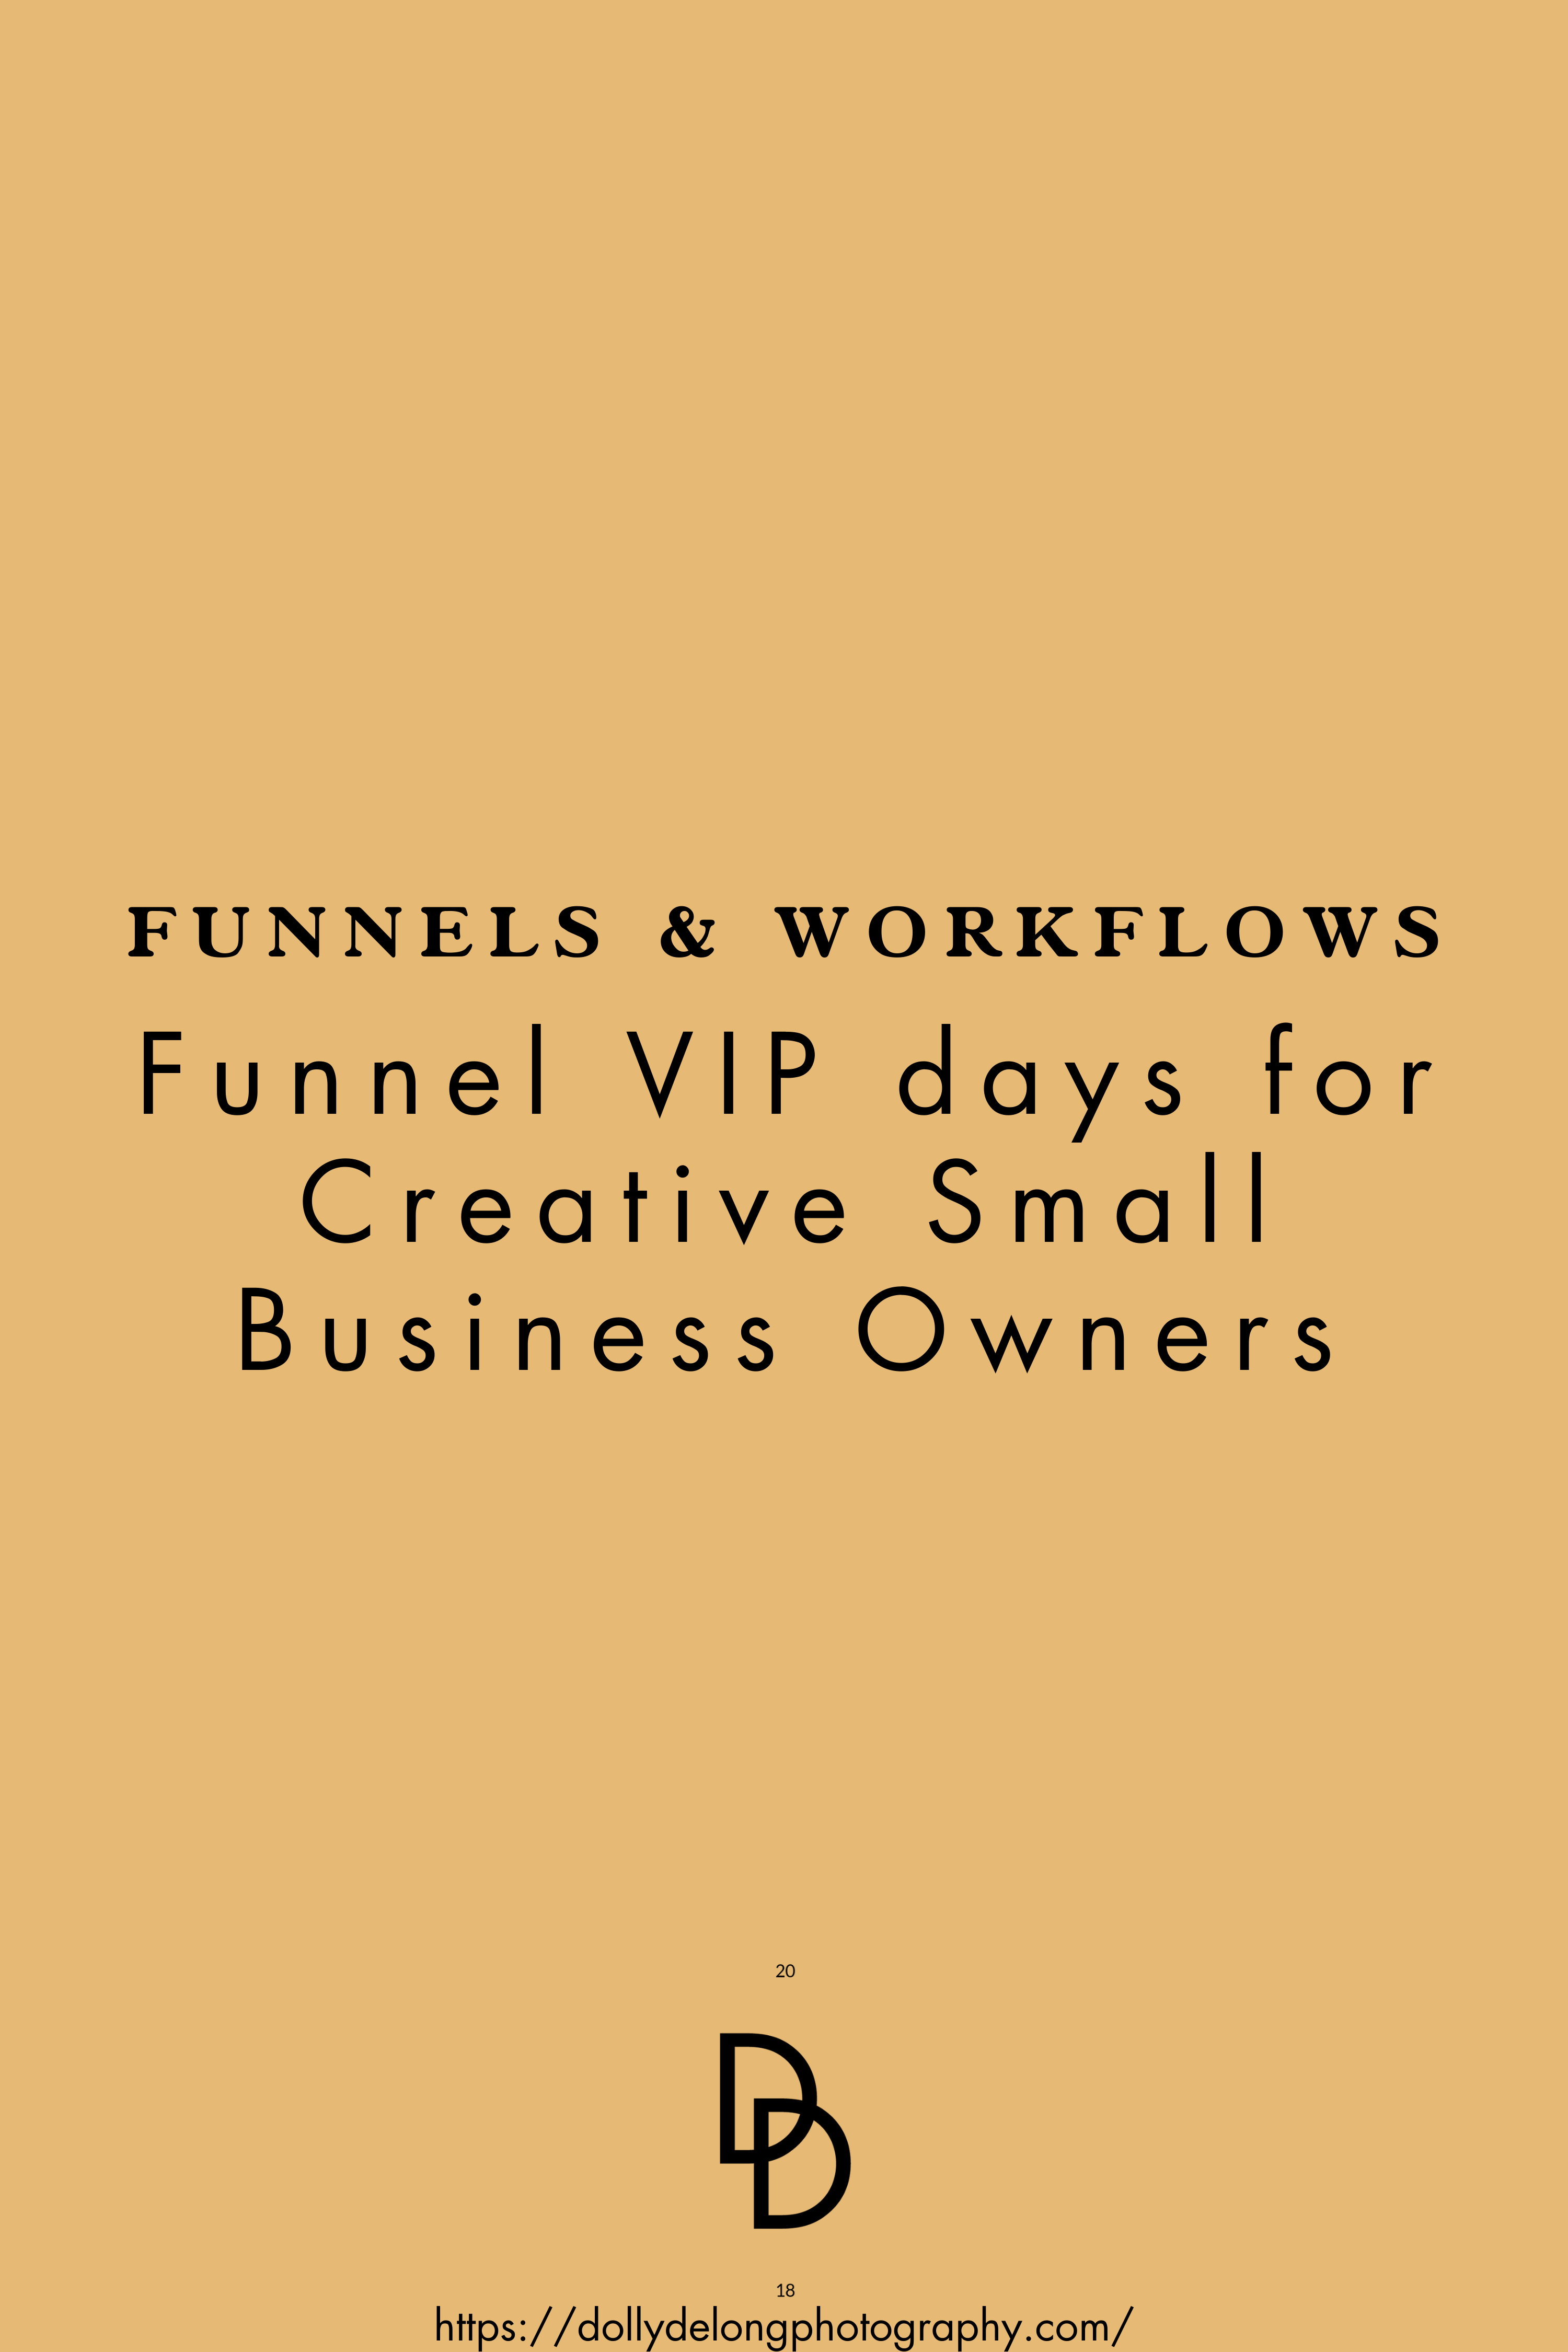 How to take the stress and overwhelm out of funnels and how to be strategic with funnels and workflows2